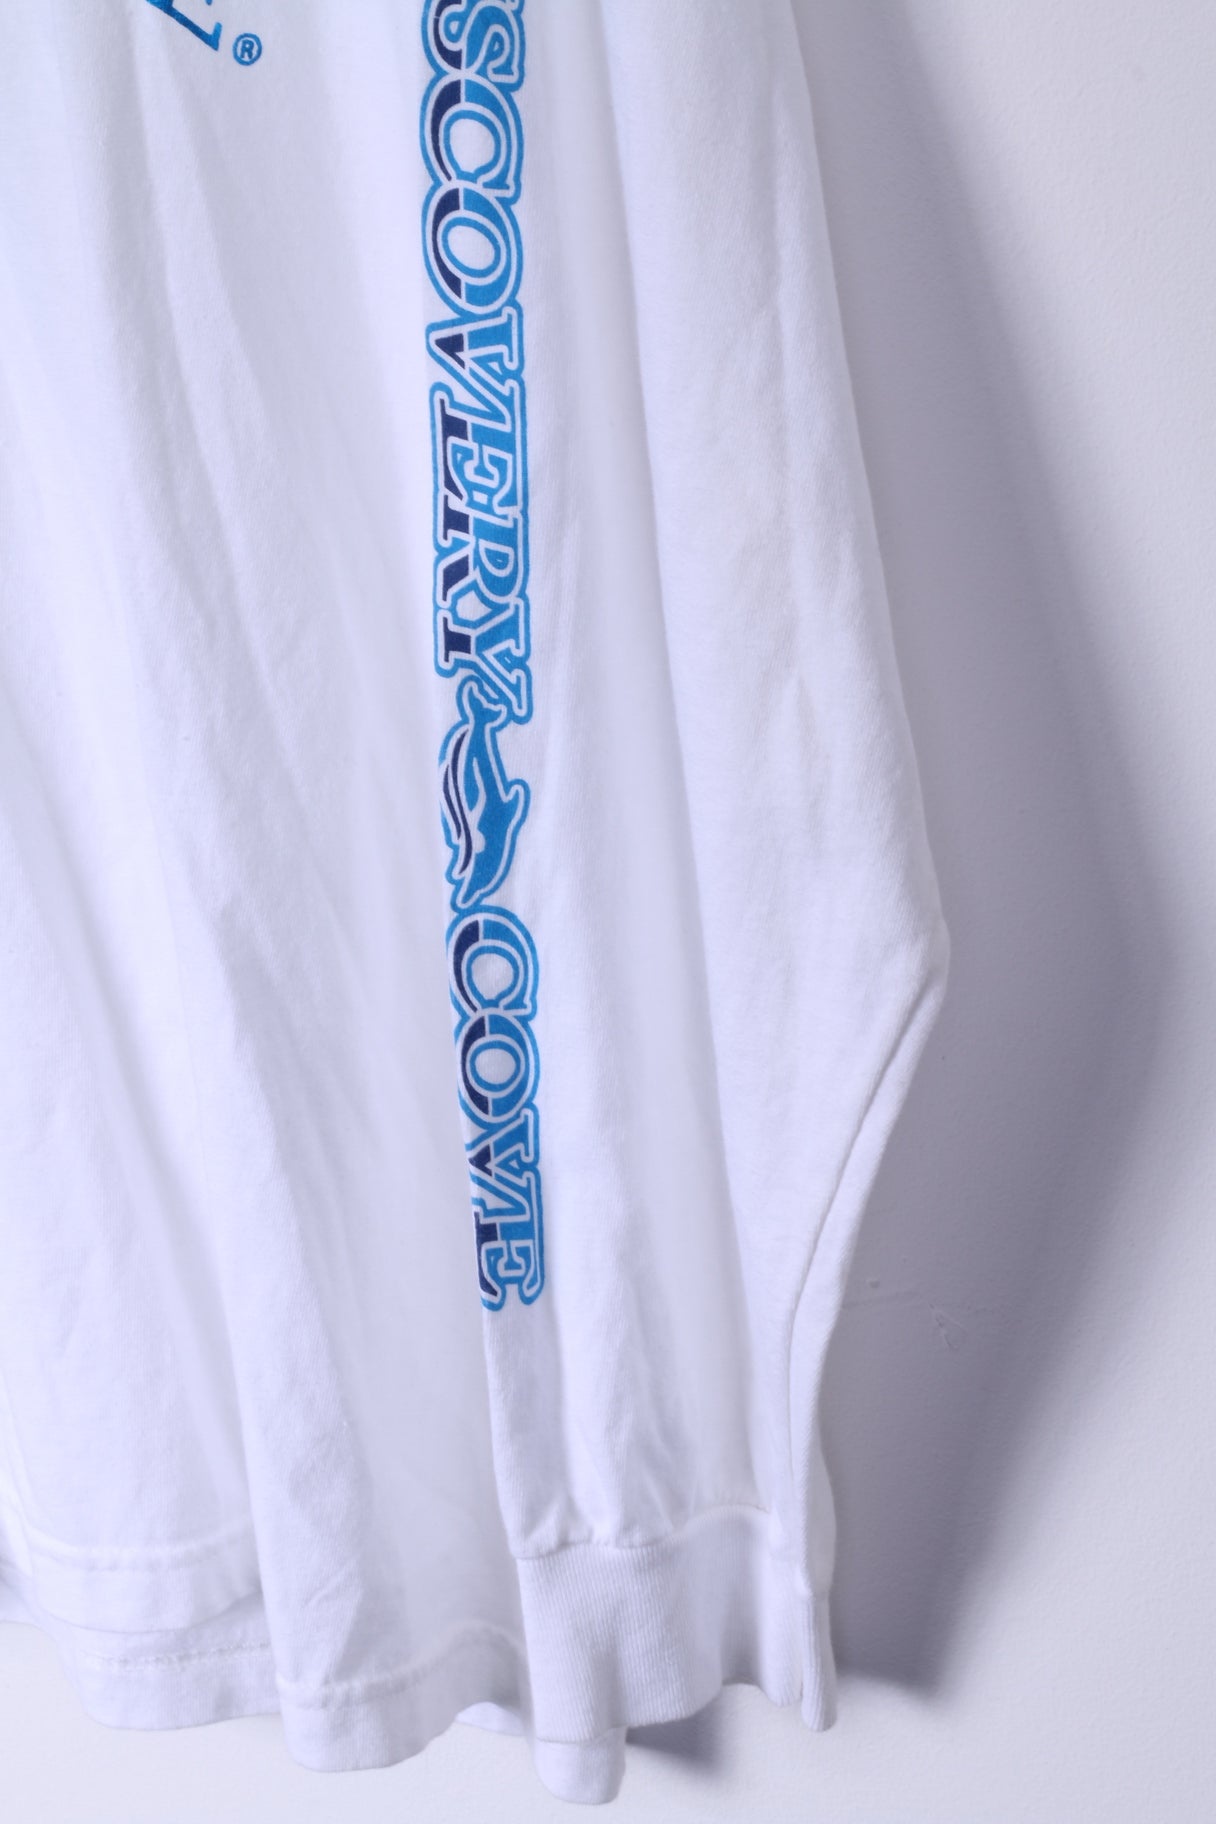 Discovery Cove Mens XL Shirt White Long Sleeve Cotton Dolphins Graphic